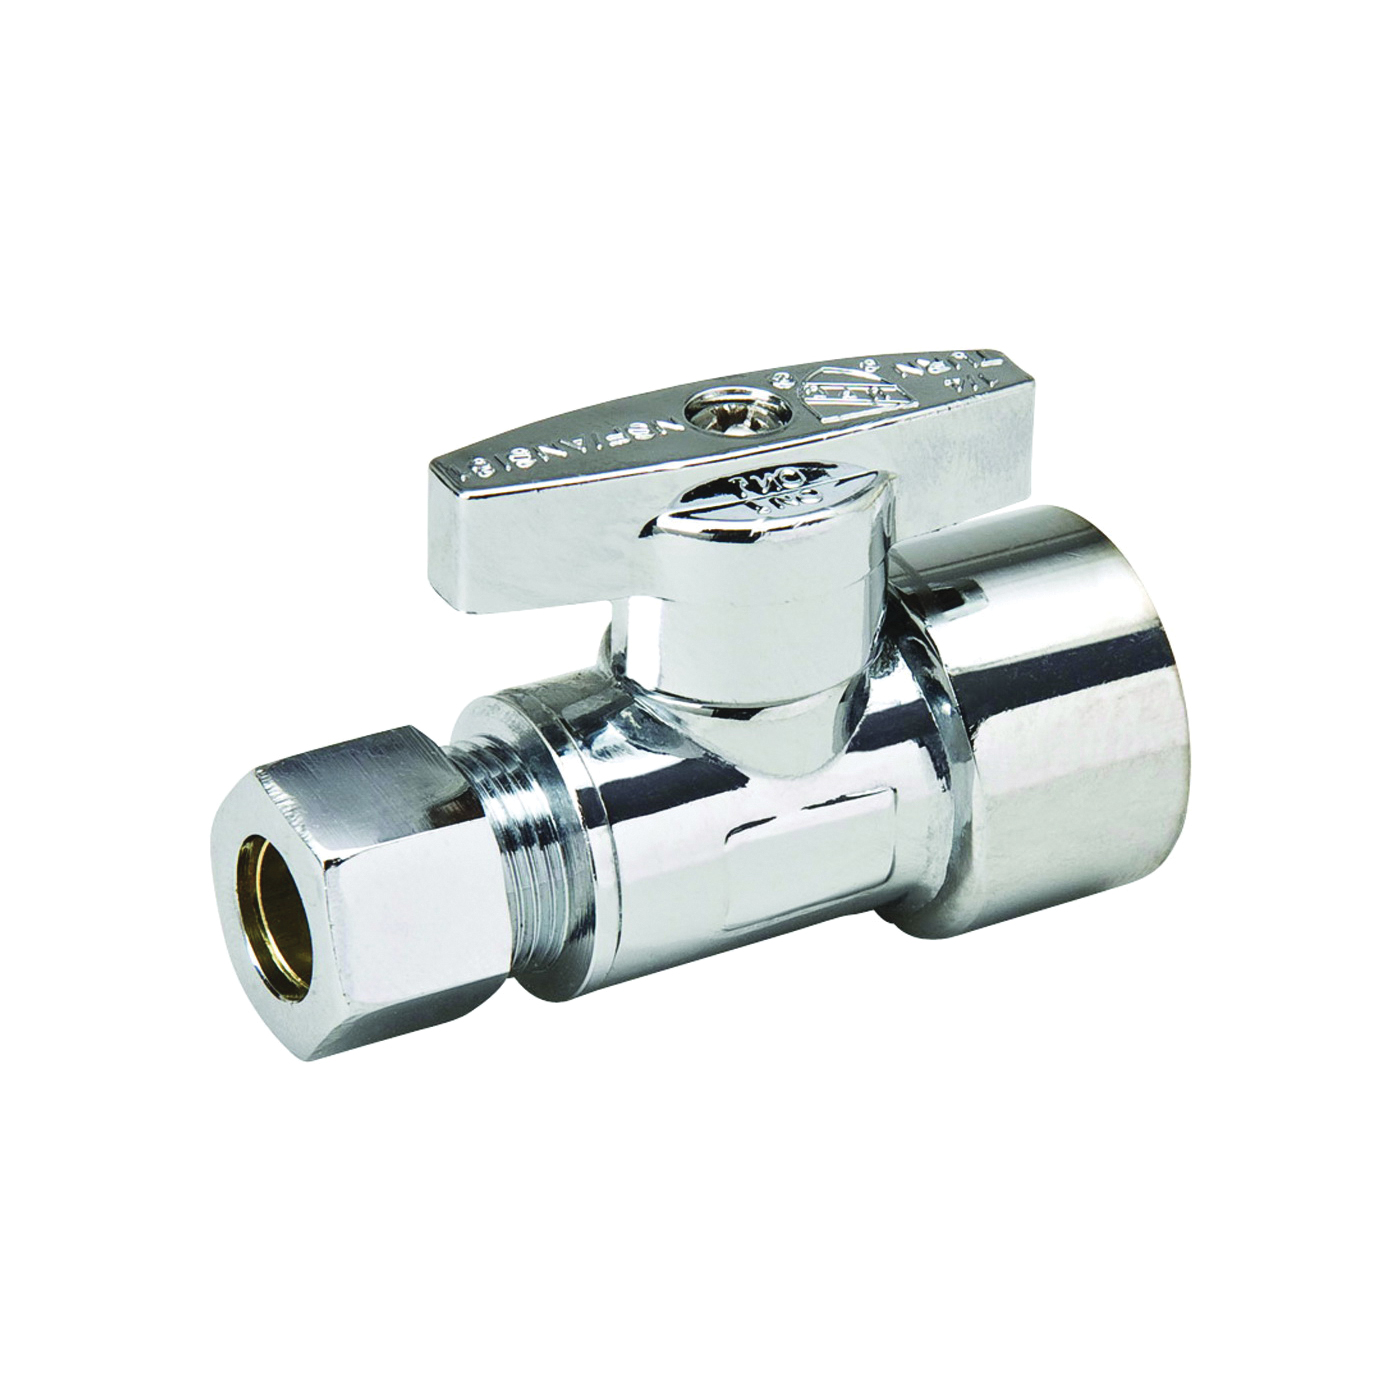 191-232HC Supply Line Stop Valve, 1/2 x 3/8 in Connection, Compression x FIP, 125 psi Pressure, Brass Body